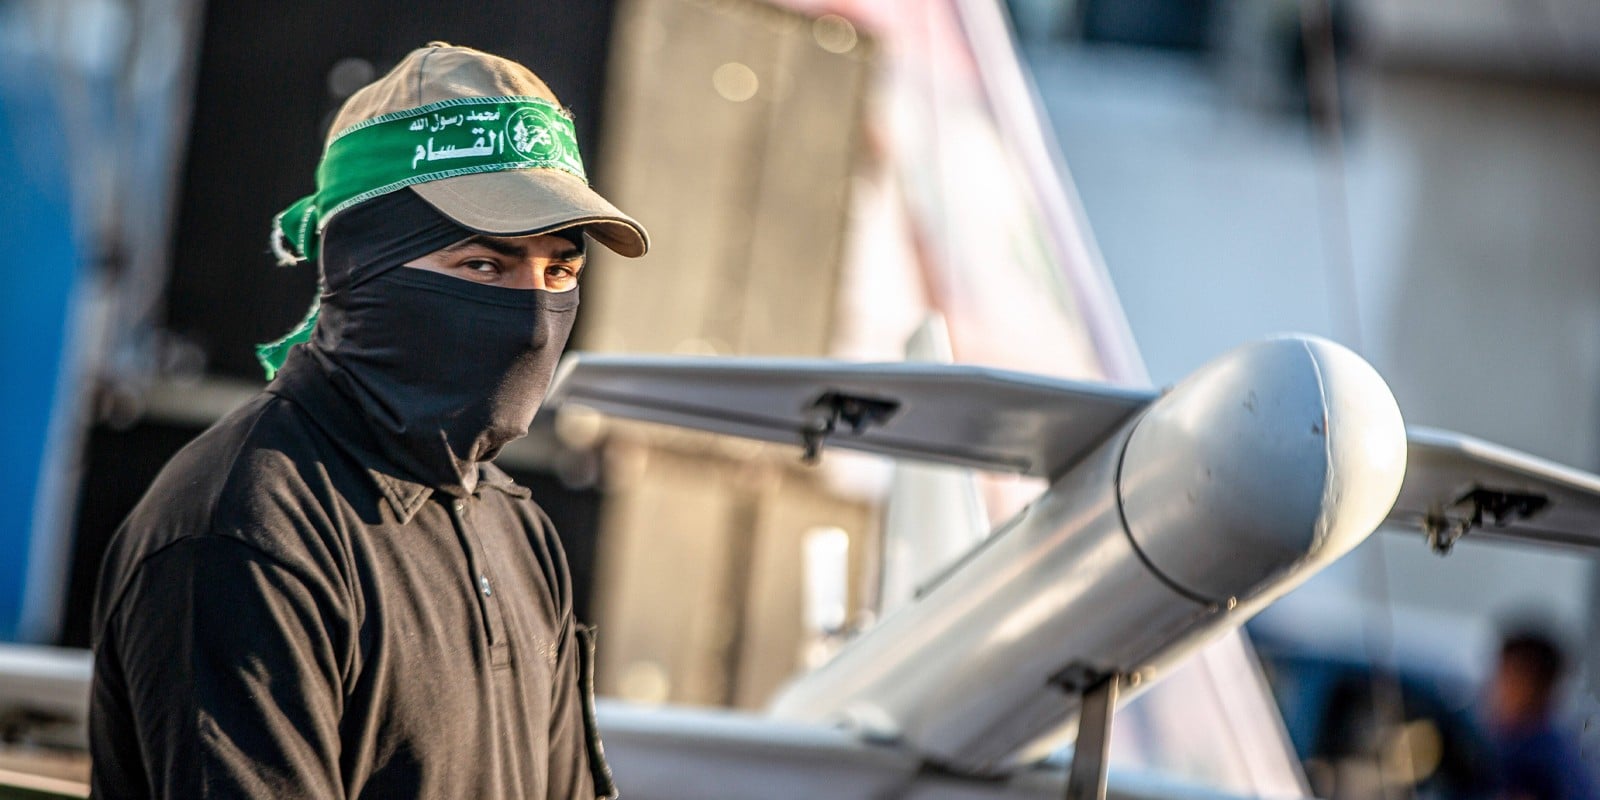 A member of the Izz al-Din al-Qassam Brigades, the armed wing of the Hamas, parades their homemade drones in Khan Yunis.